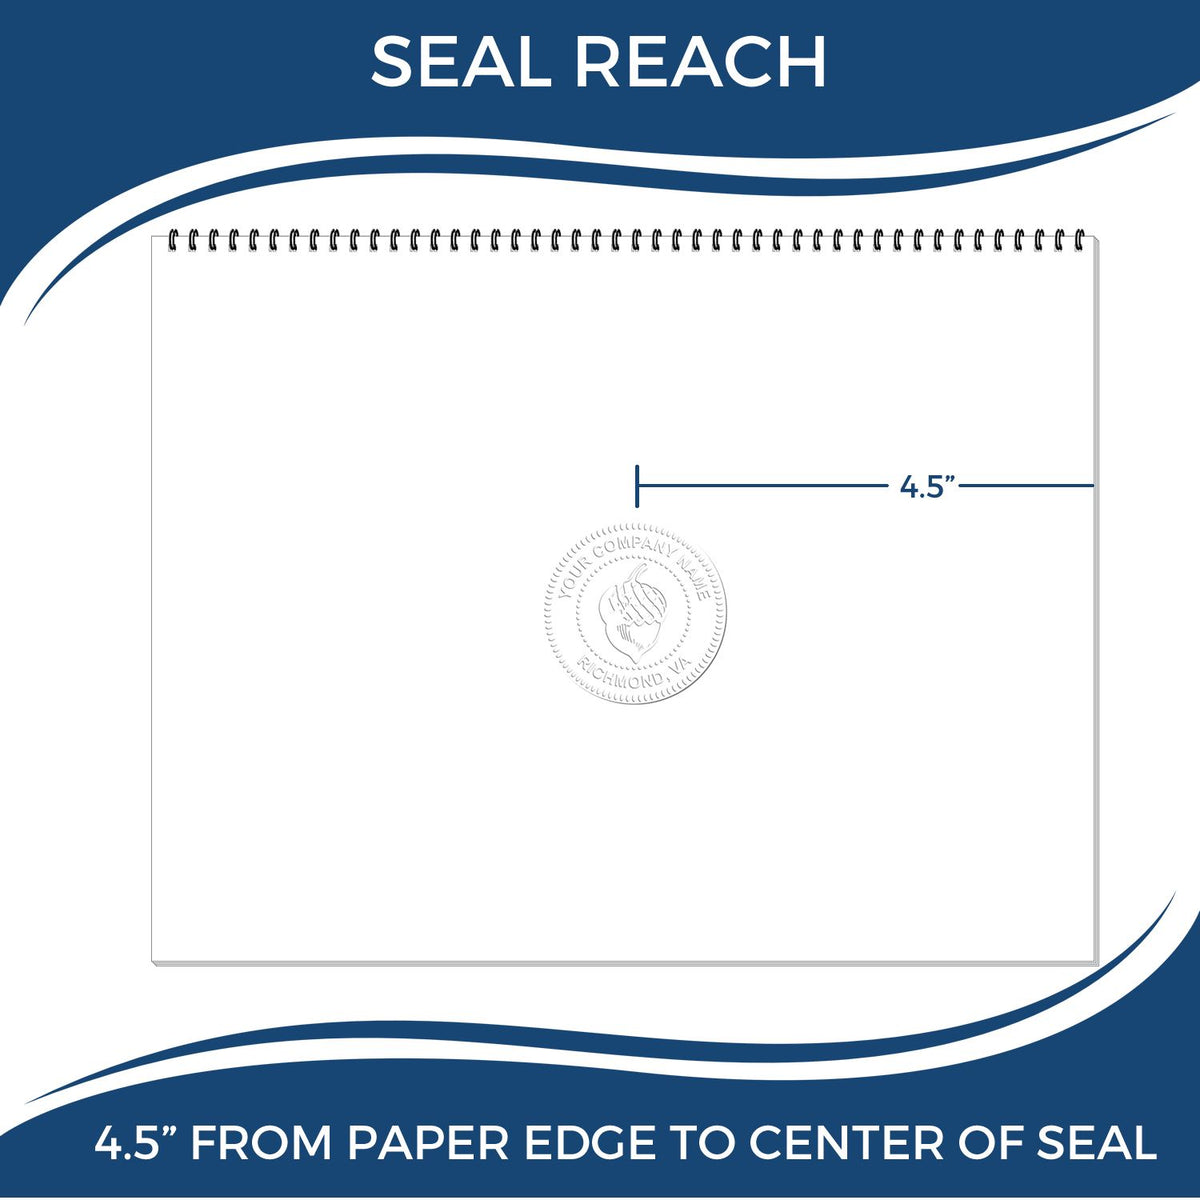 An infographic showing the seal reach which is represented by a ruler and a miniature seal image of the State of Massachusetts Extended Long Reach Geologist Seal